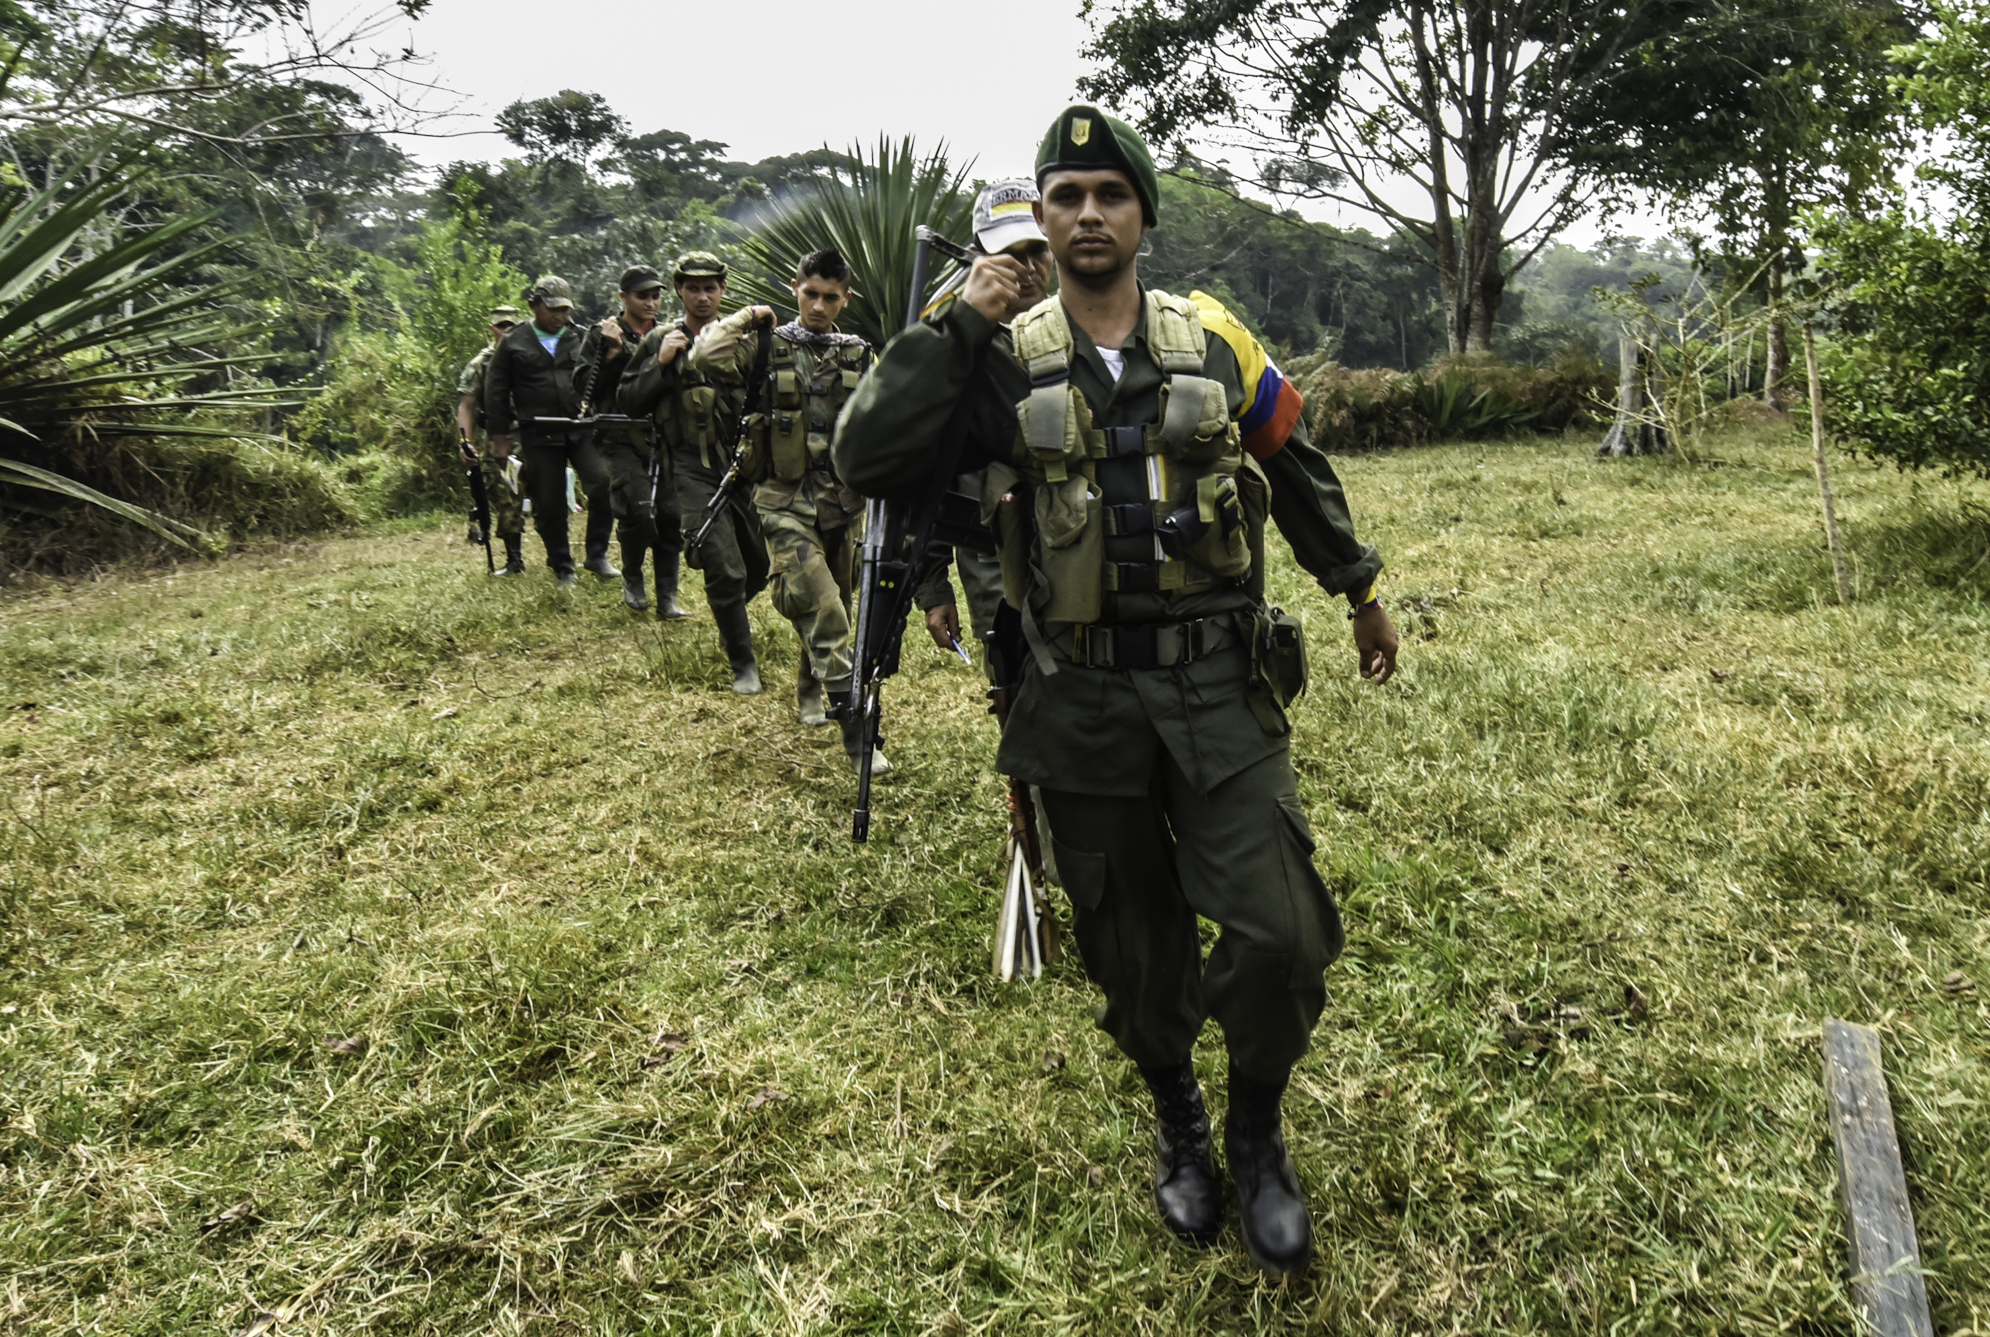 Revolutionary Armed Forces of Colombia (FARC) members patrol a camp in the Magdalena Medio region, Antioquia department, Colombia on February 18, 2016. (LUIS ACOSTA—AFP/Getty Images)